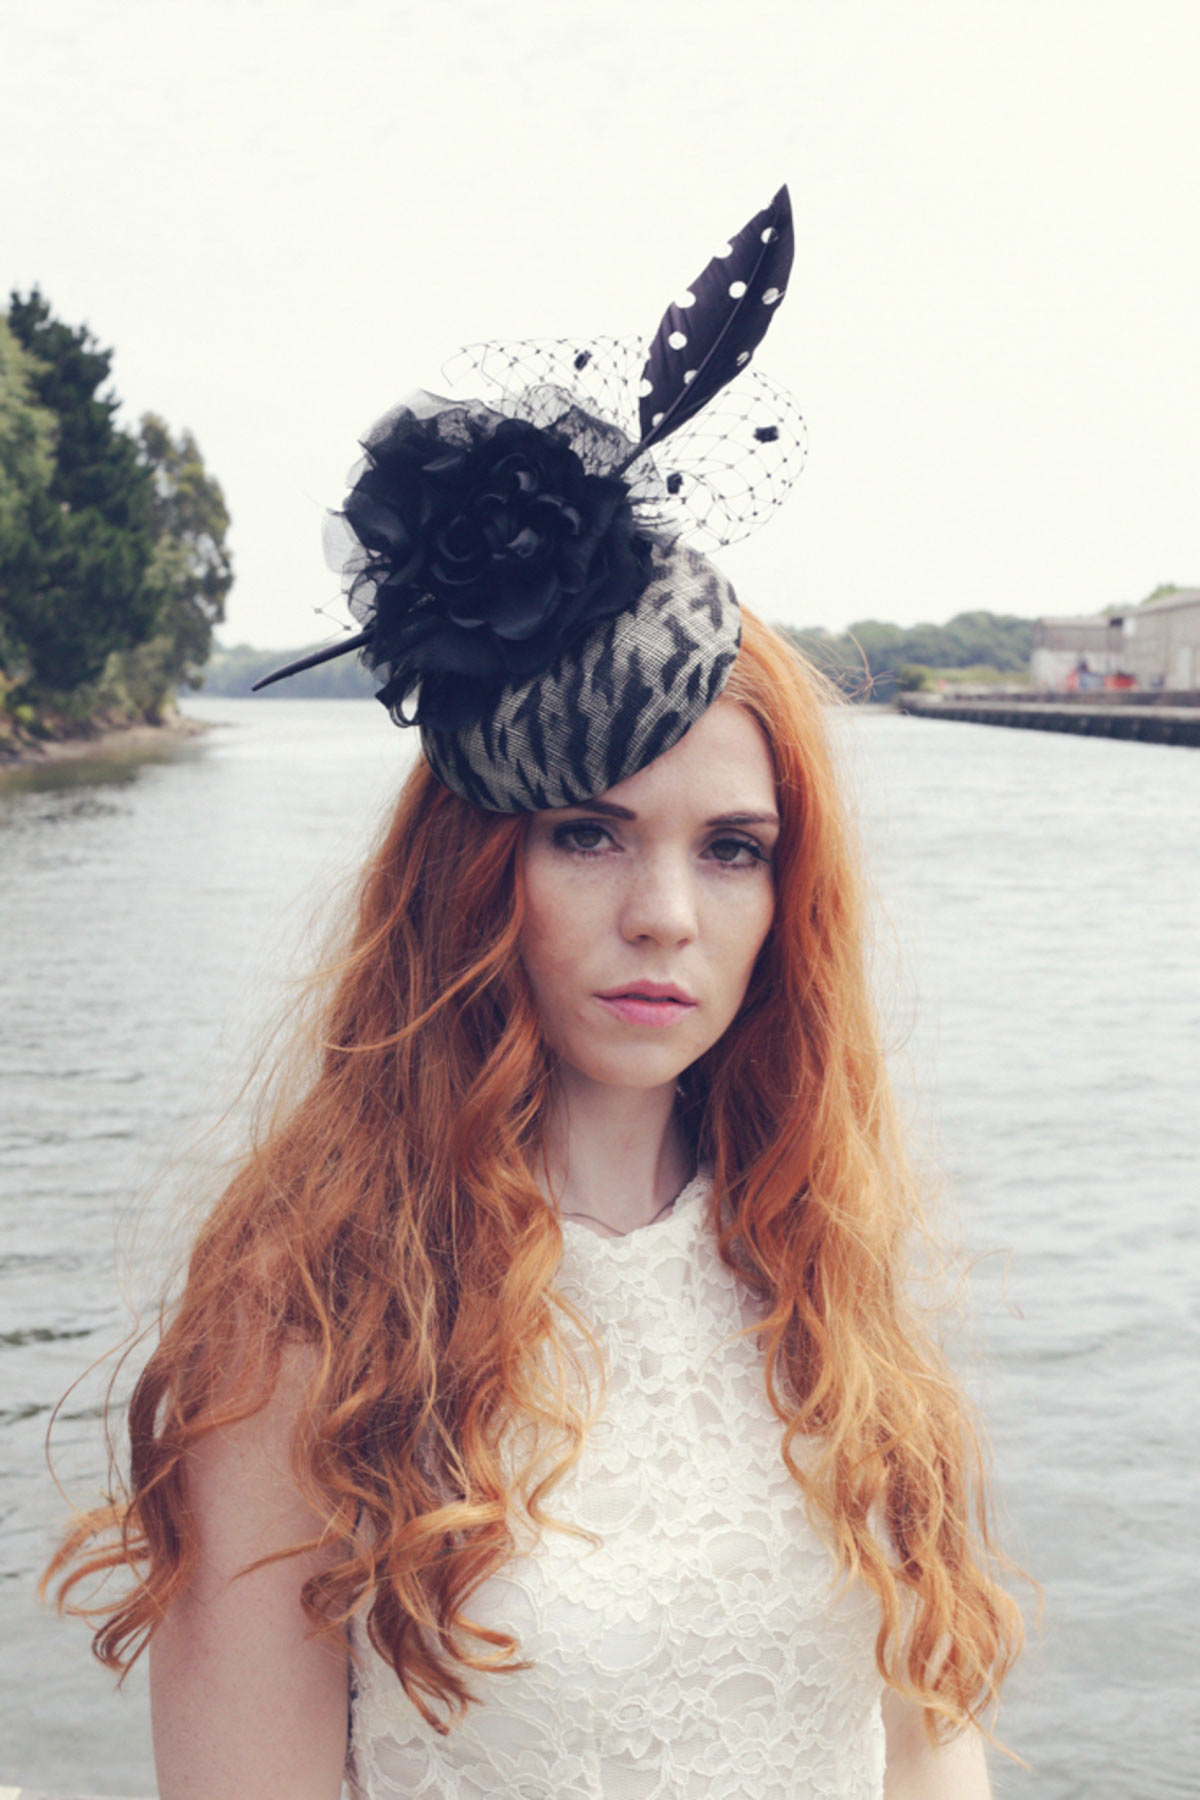 Hat hire now available from Holly Young Headwear